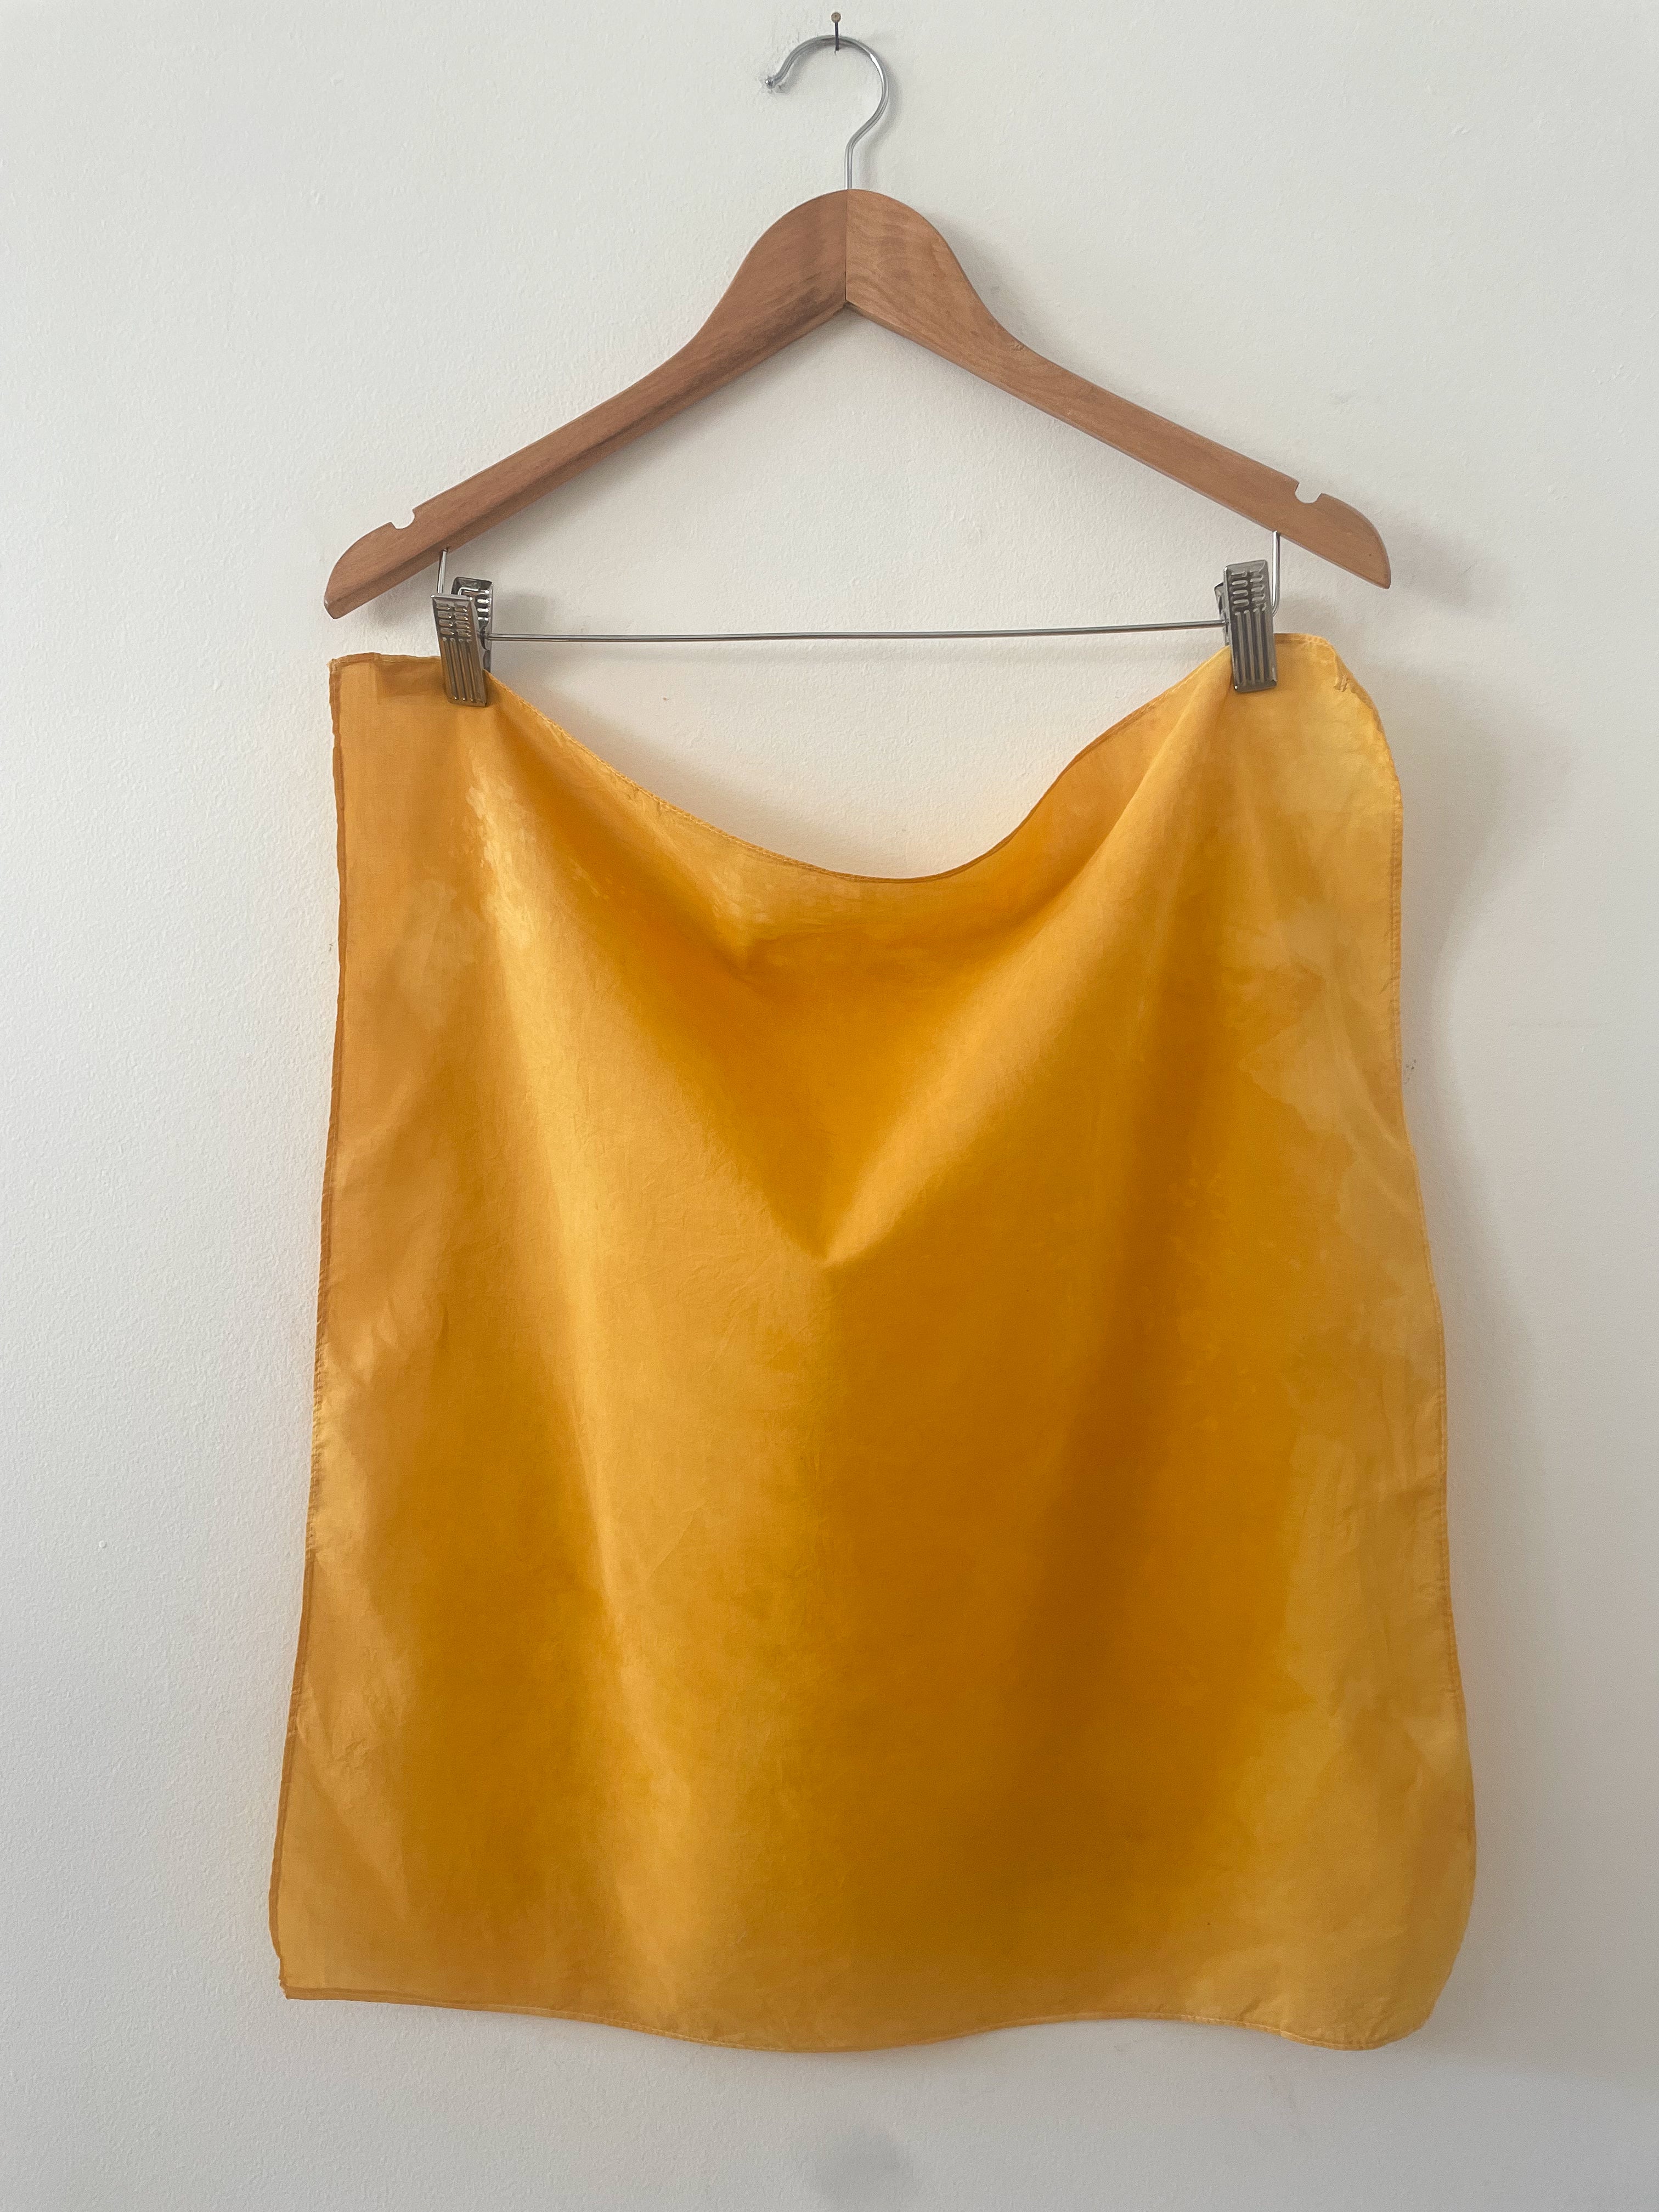 Hand-Dyed Silk Scarves - Sulfur Cosmos